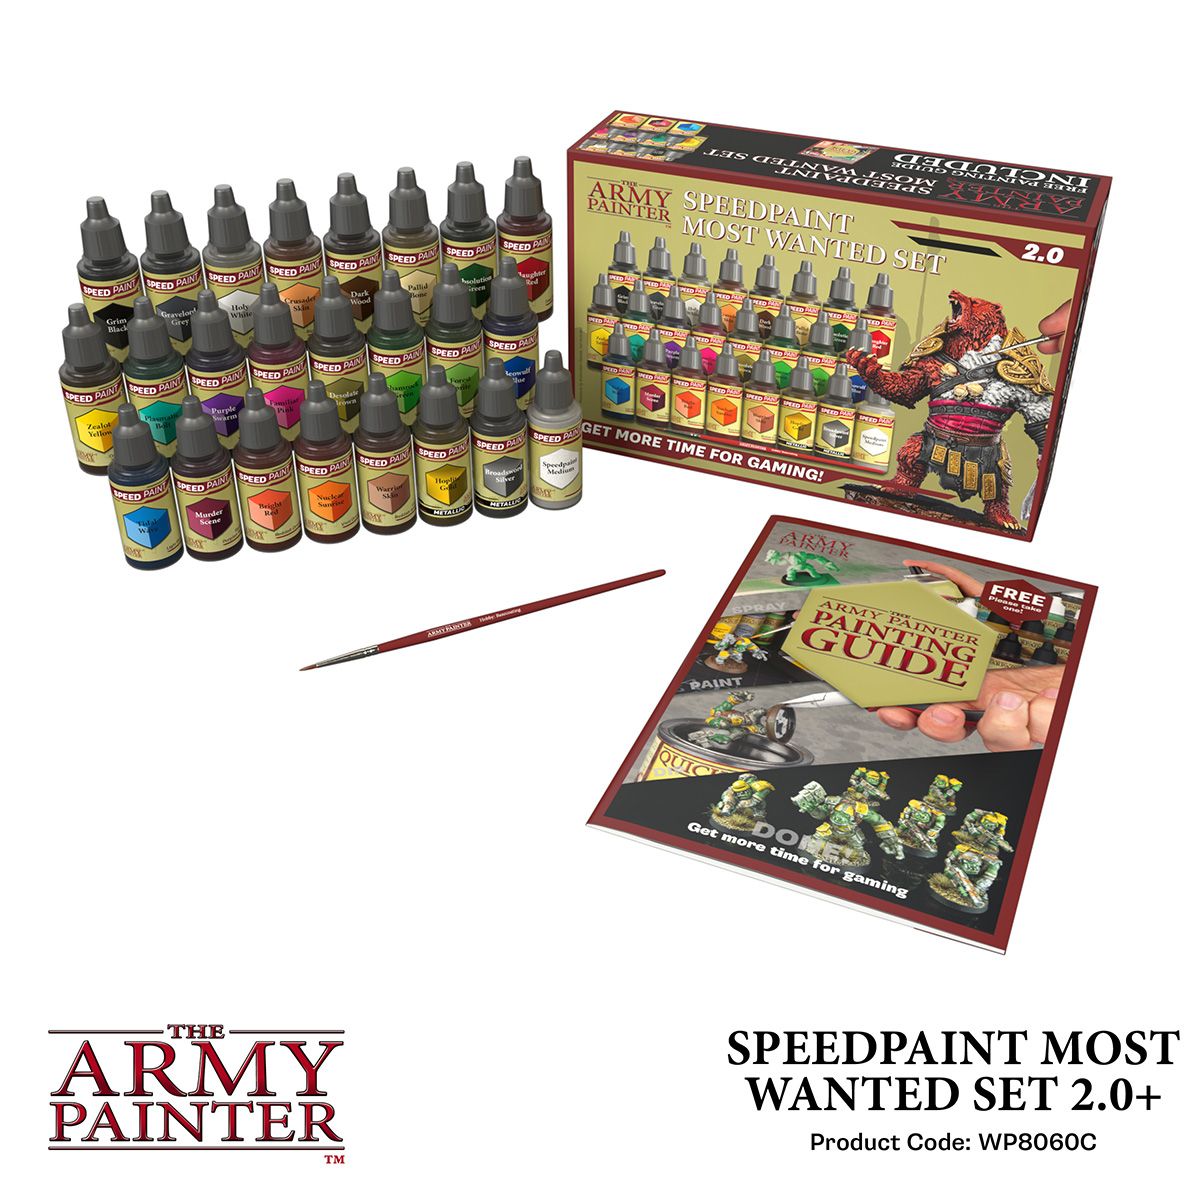 The Army Painter -  Speedpaint Most Wanted Set 2.0+